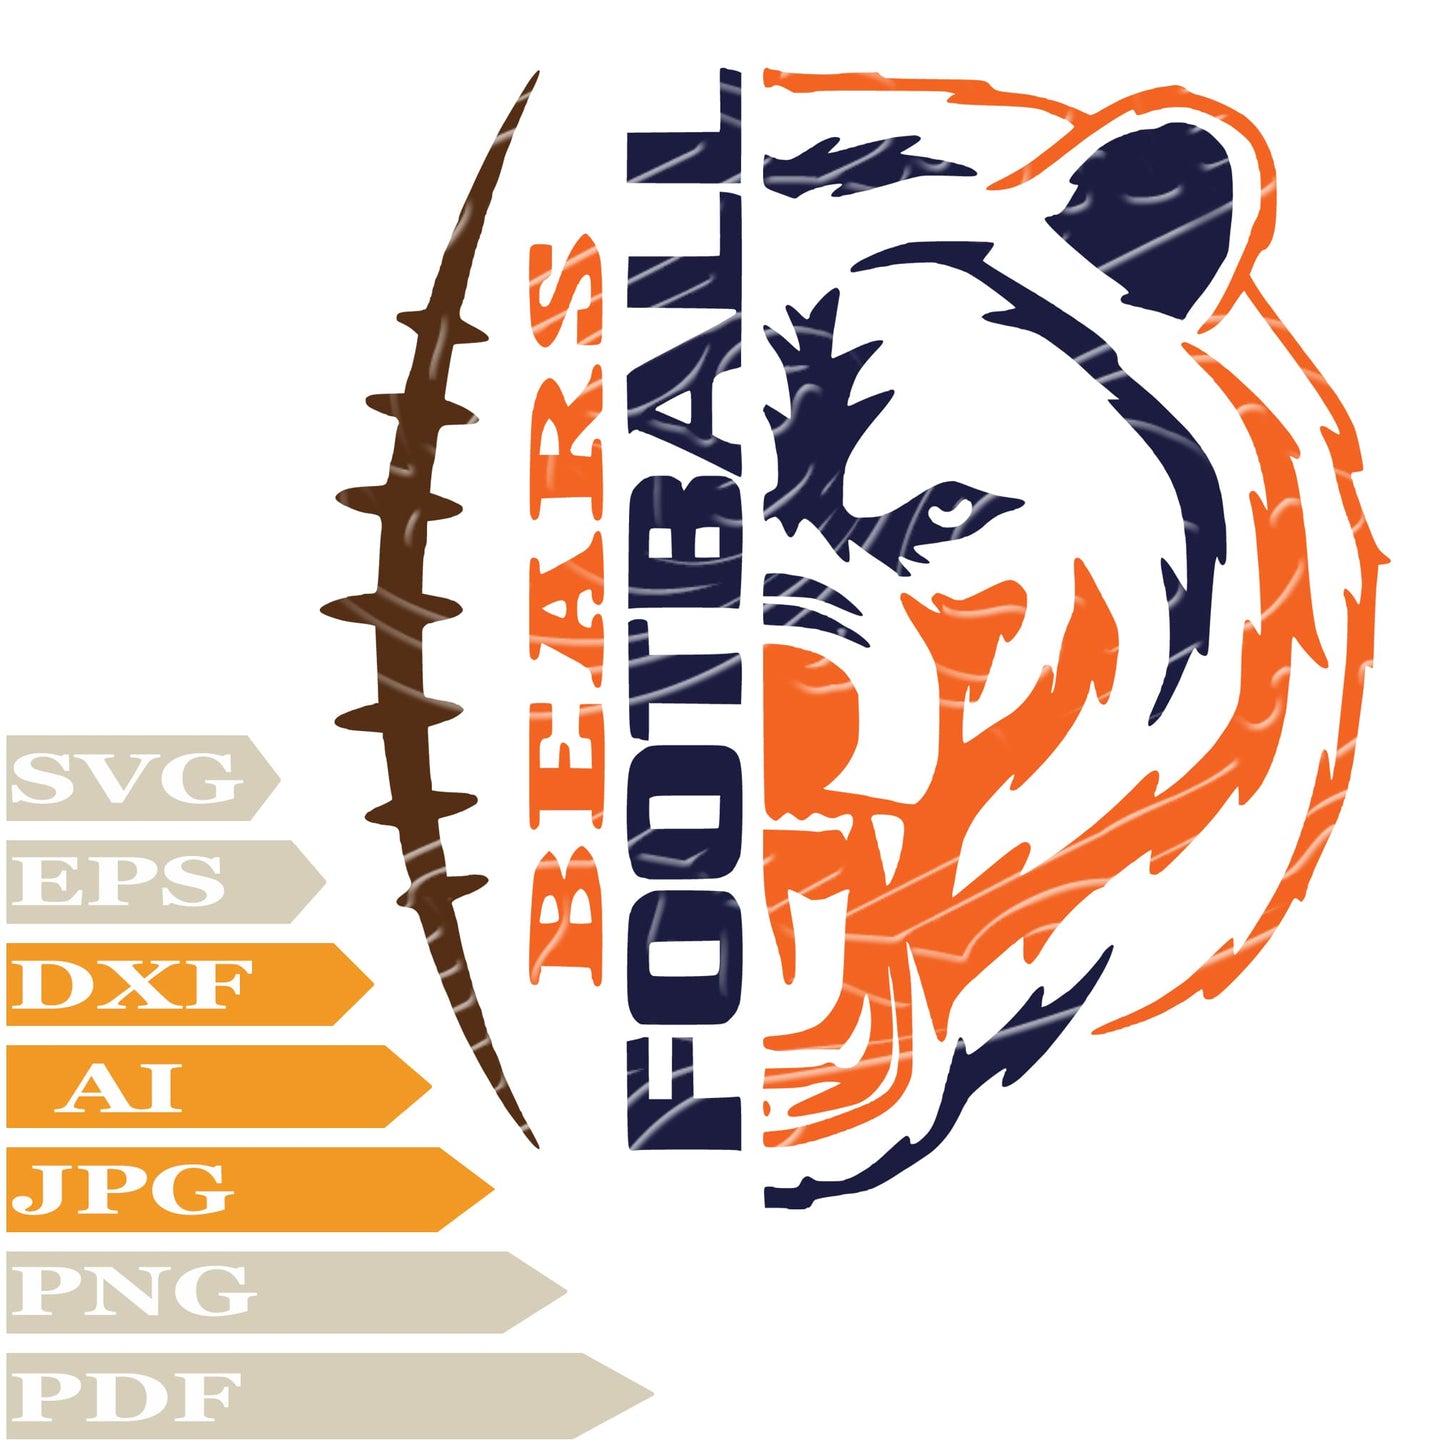 Bears Football, Chicago Bears Logo Svg File, Image Cut, Png, For Tattoo, Silhouette, Digital Vector Download, Cut File, Clipart, For Cricut